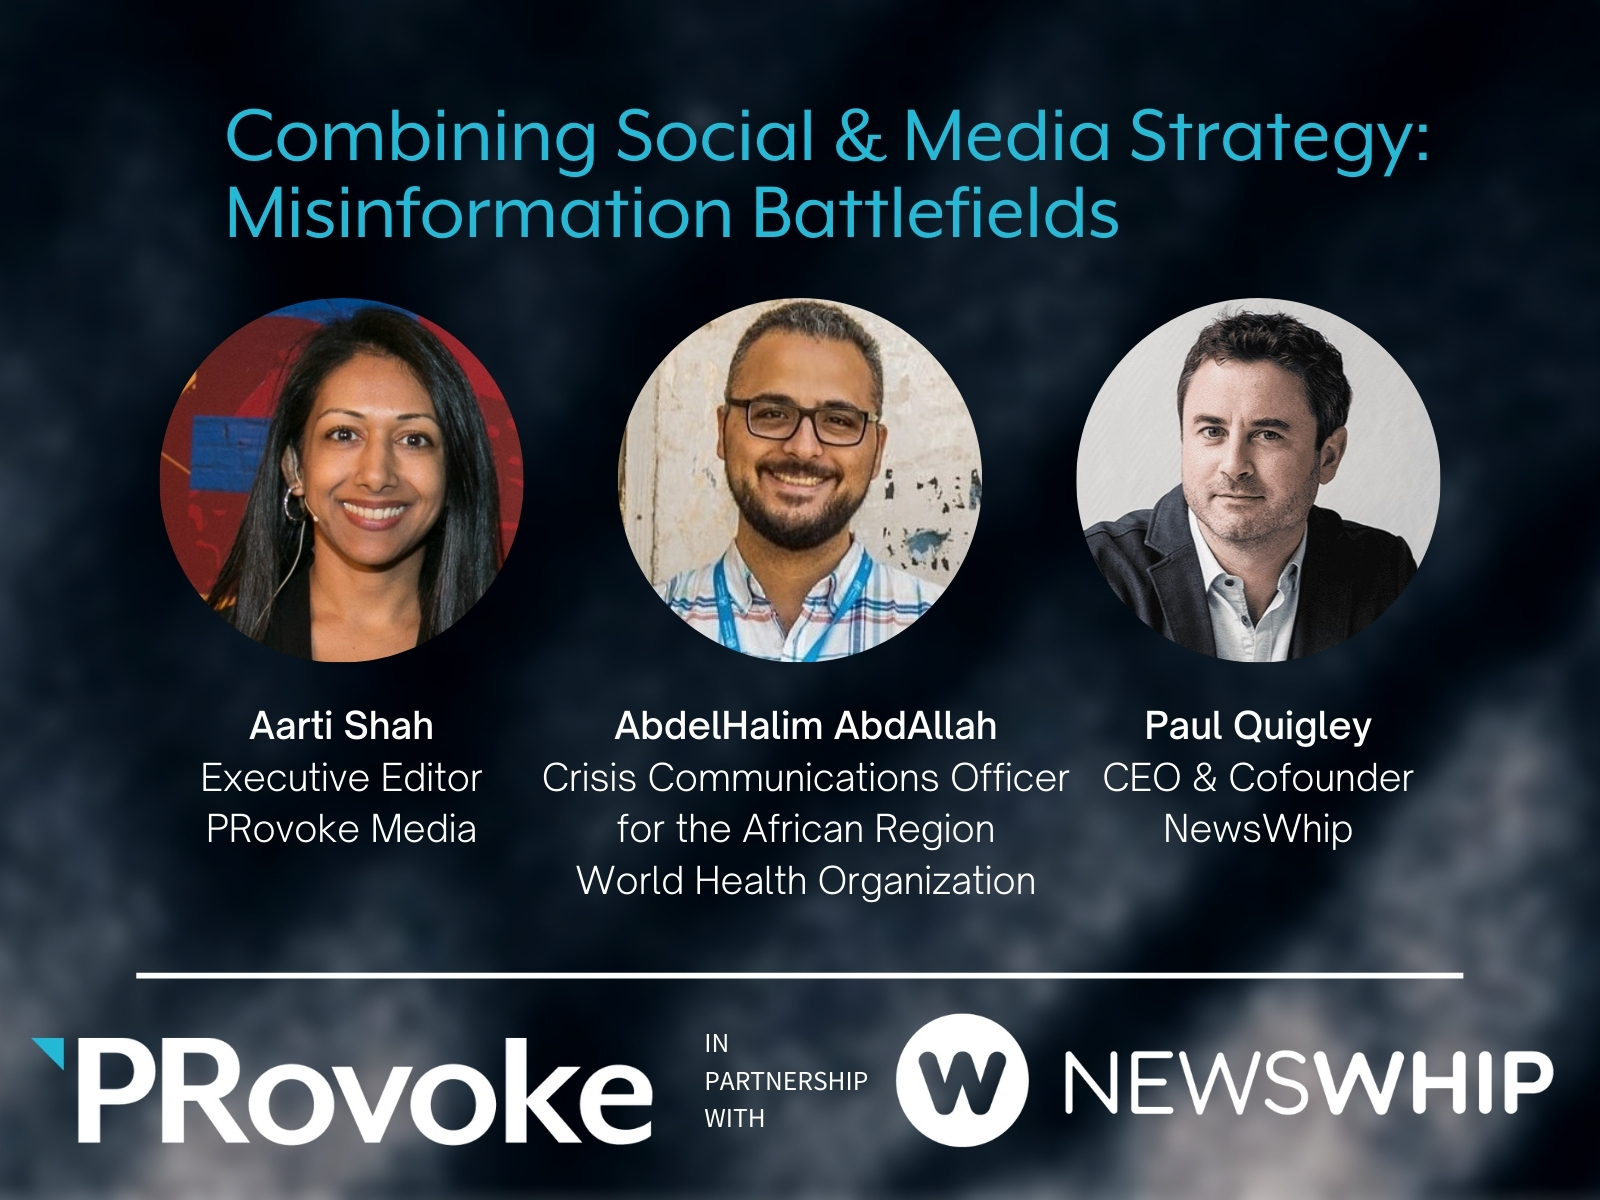 Combining Social & Media Strategy: Misinformation Battlefields with WHO and NewsWhip